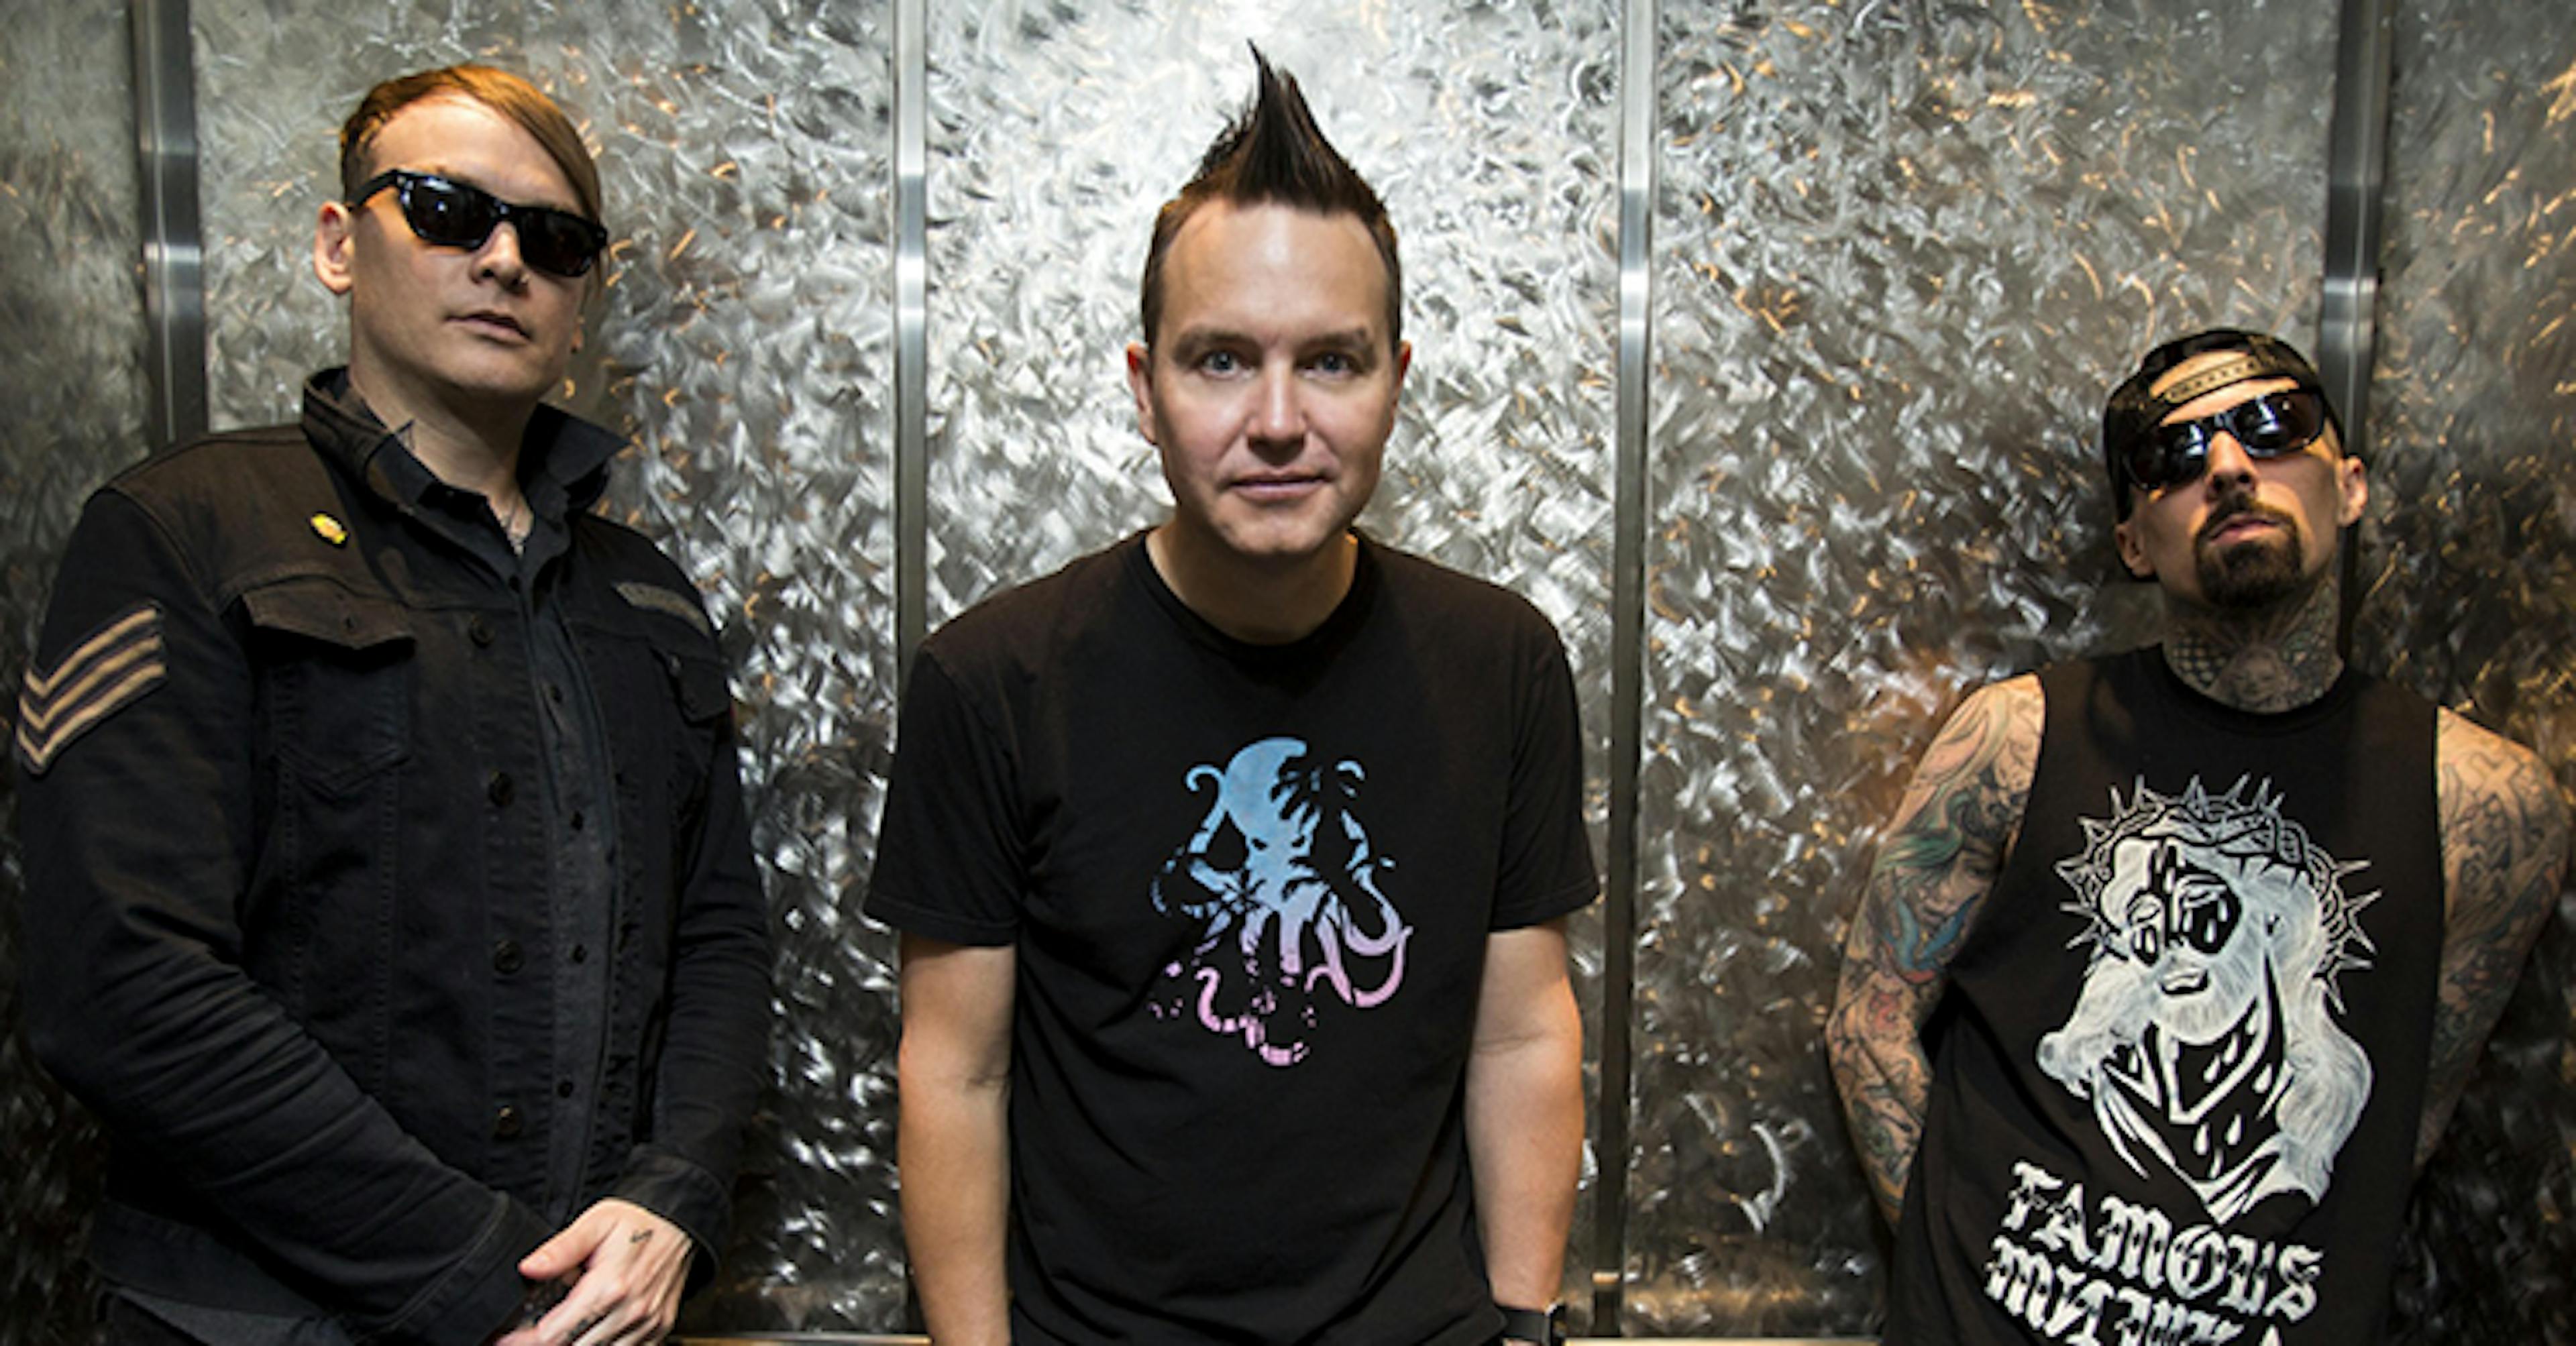 Travis Barker's Health Issues Have Forced blink-182 To Postpone Their Vegas Shows